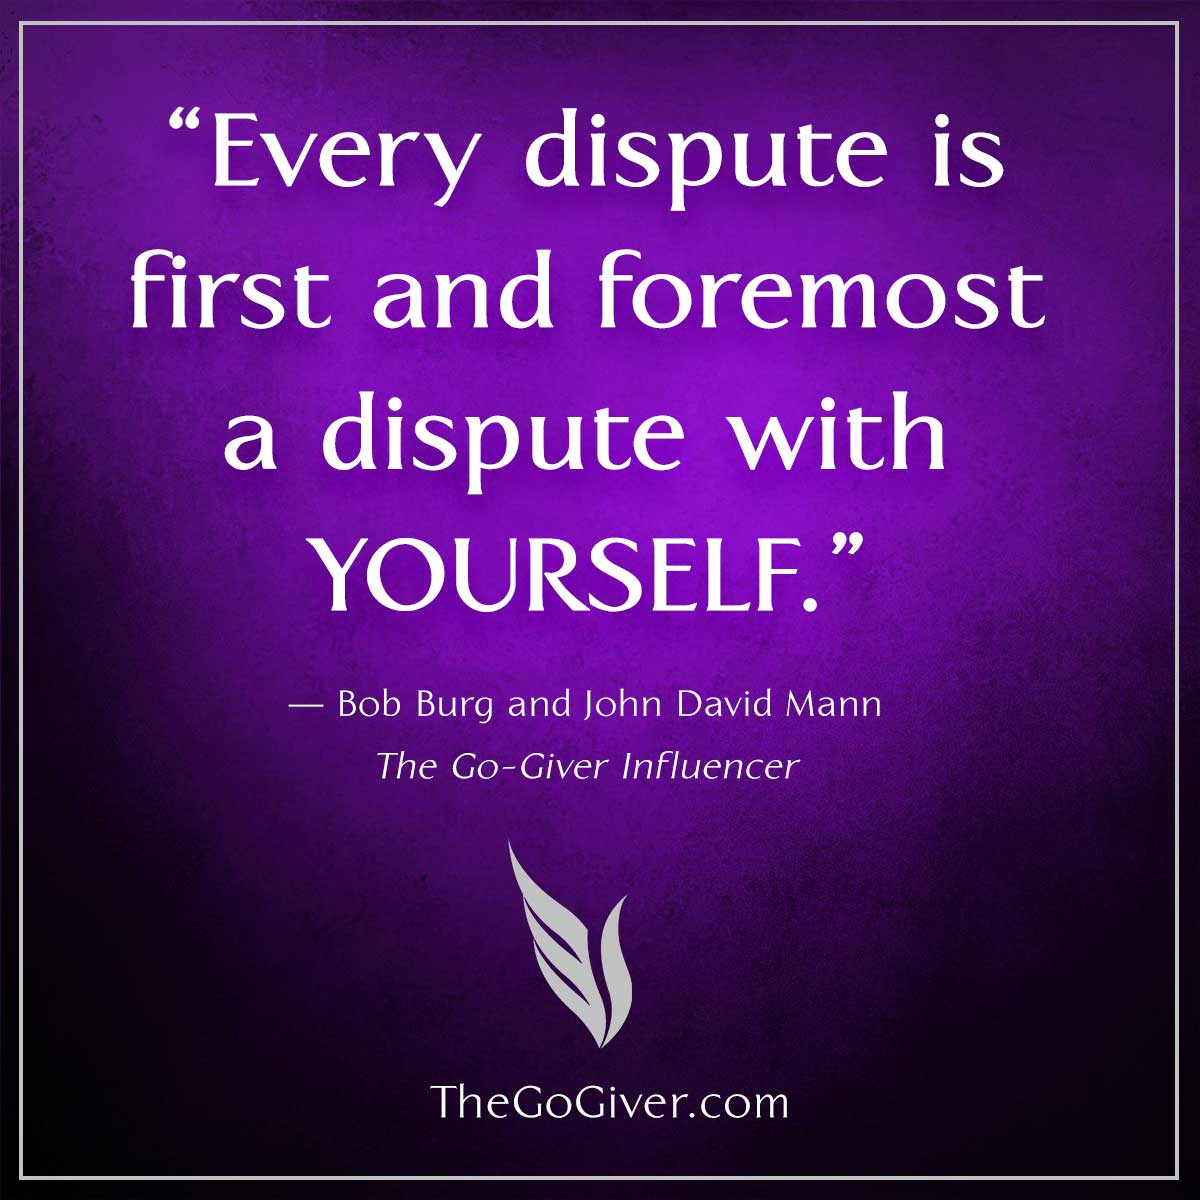 Every dispute is a dispute with yourself - The Go-Giver Influencer